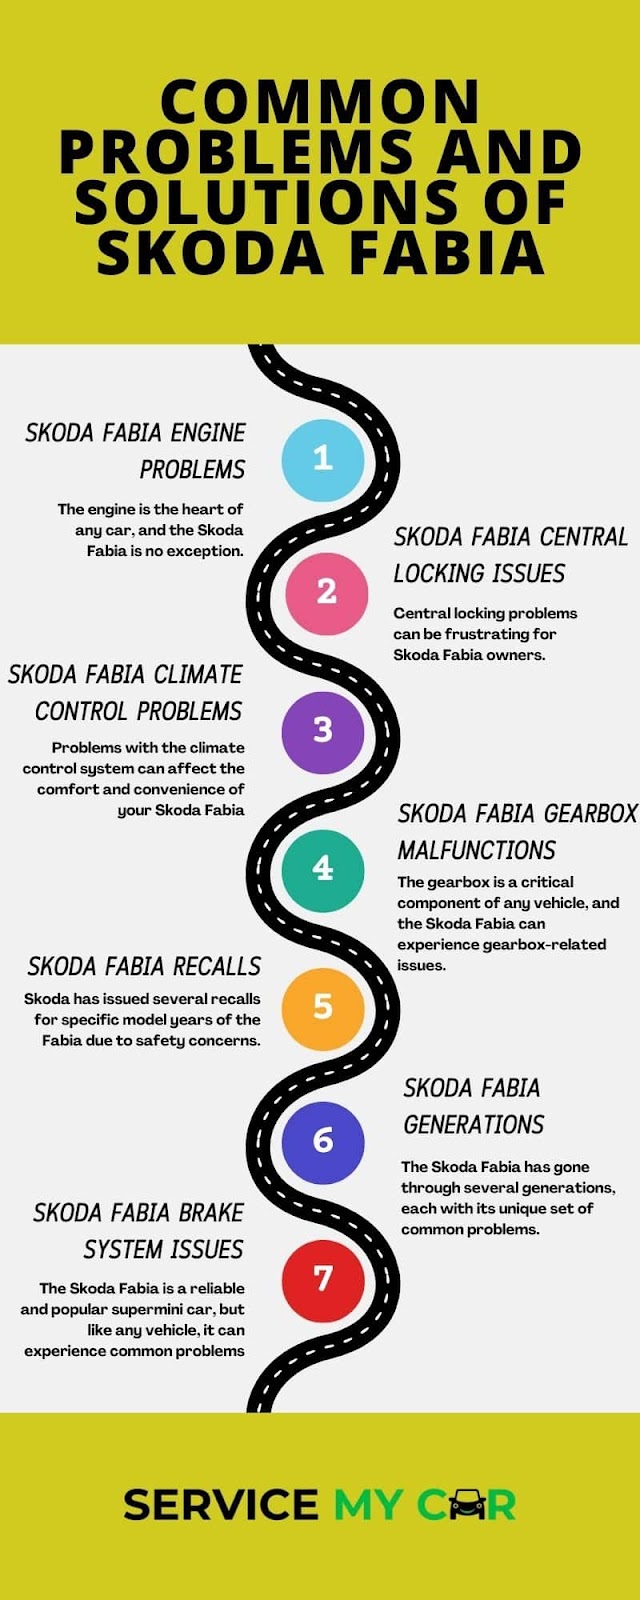 A Comprehensive Guide to Common Problems and Solutions of Skoda Fabia